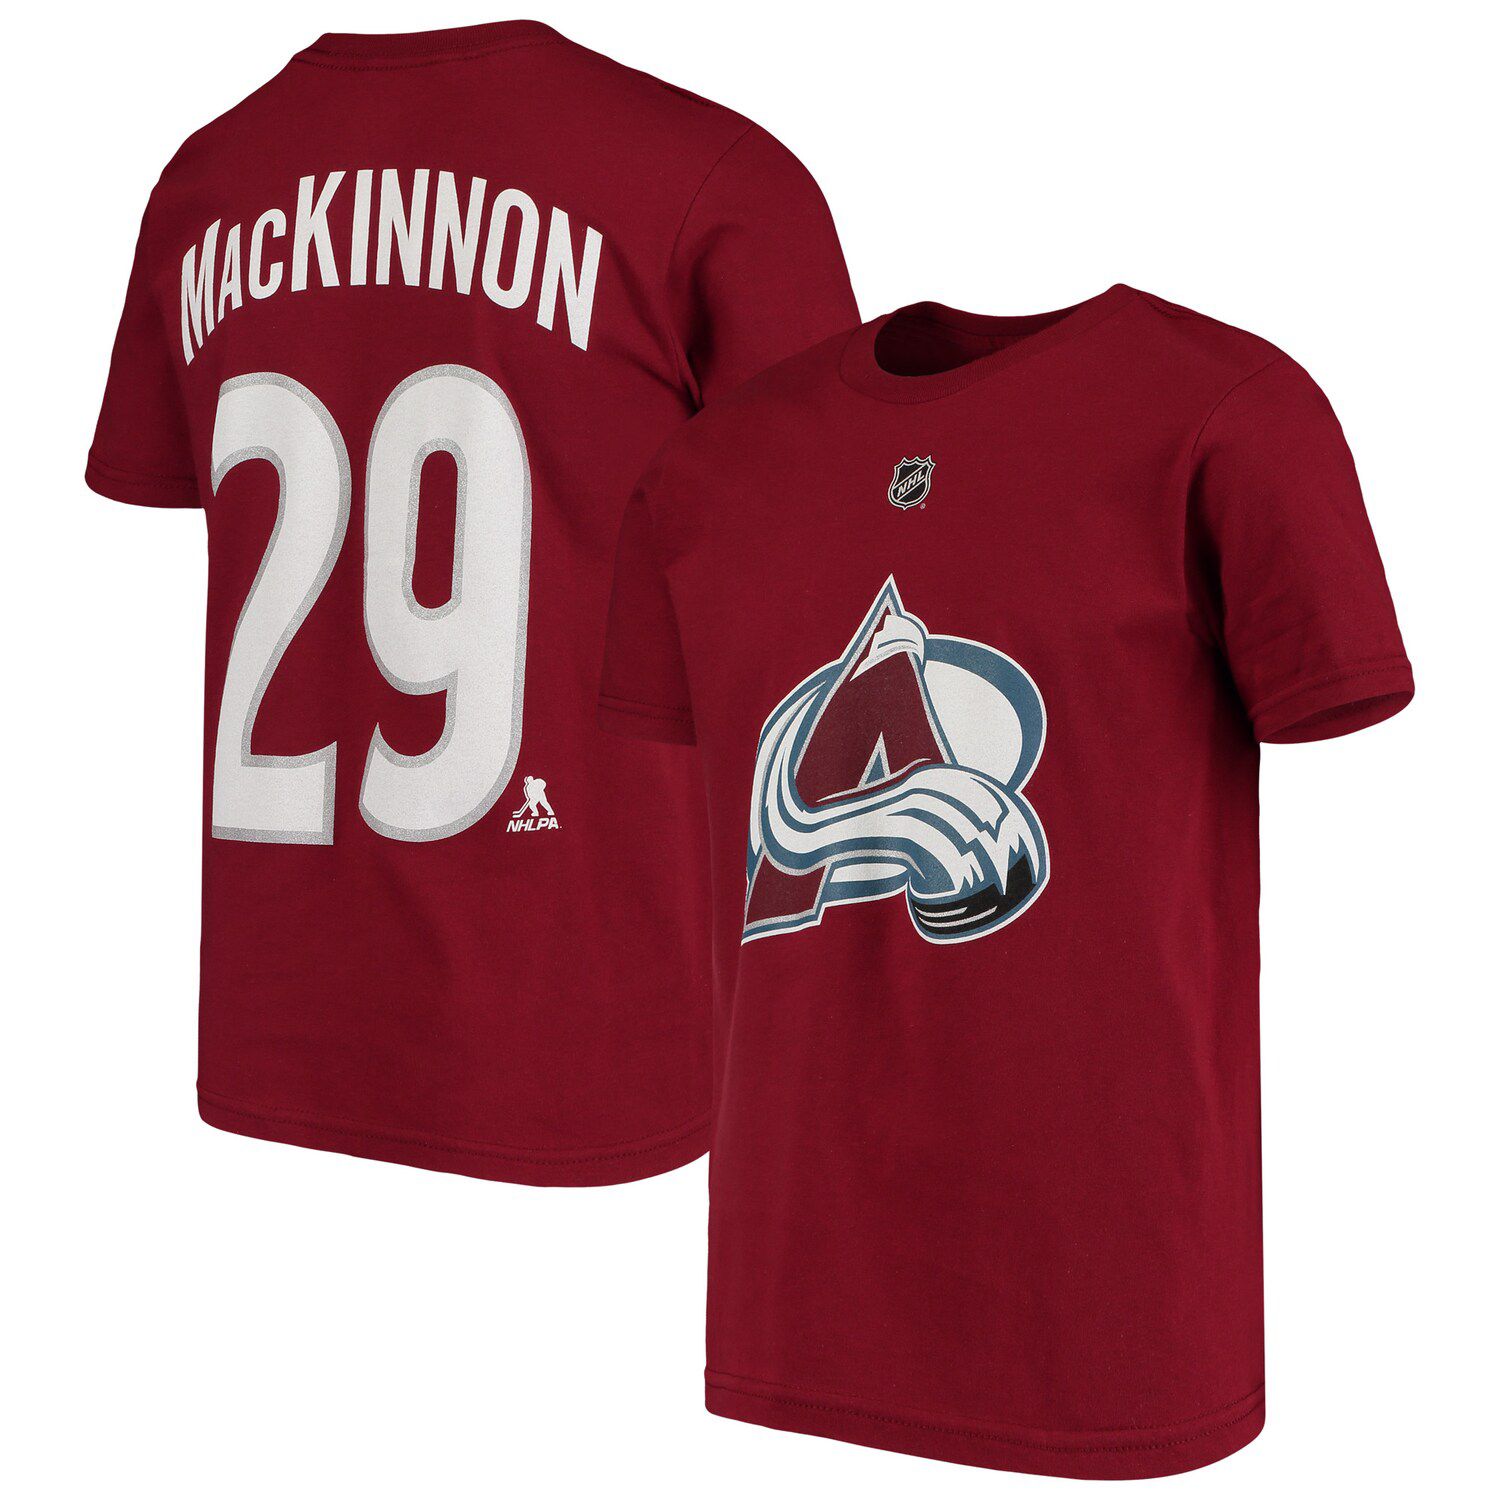 avalanche youth jersey